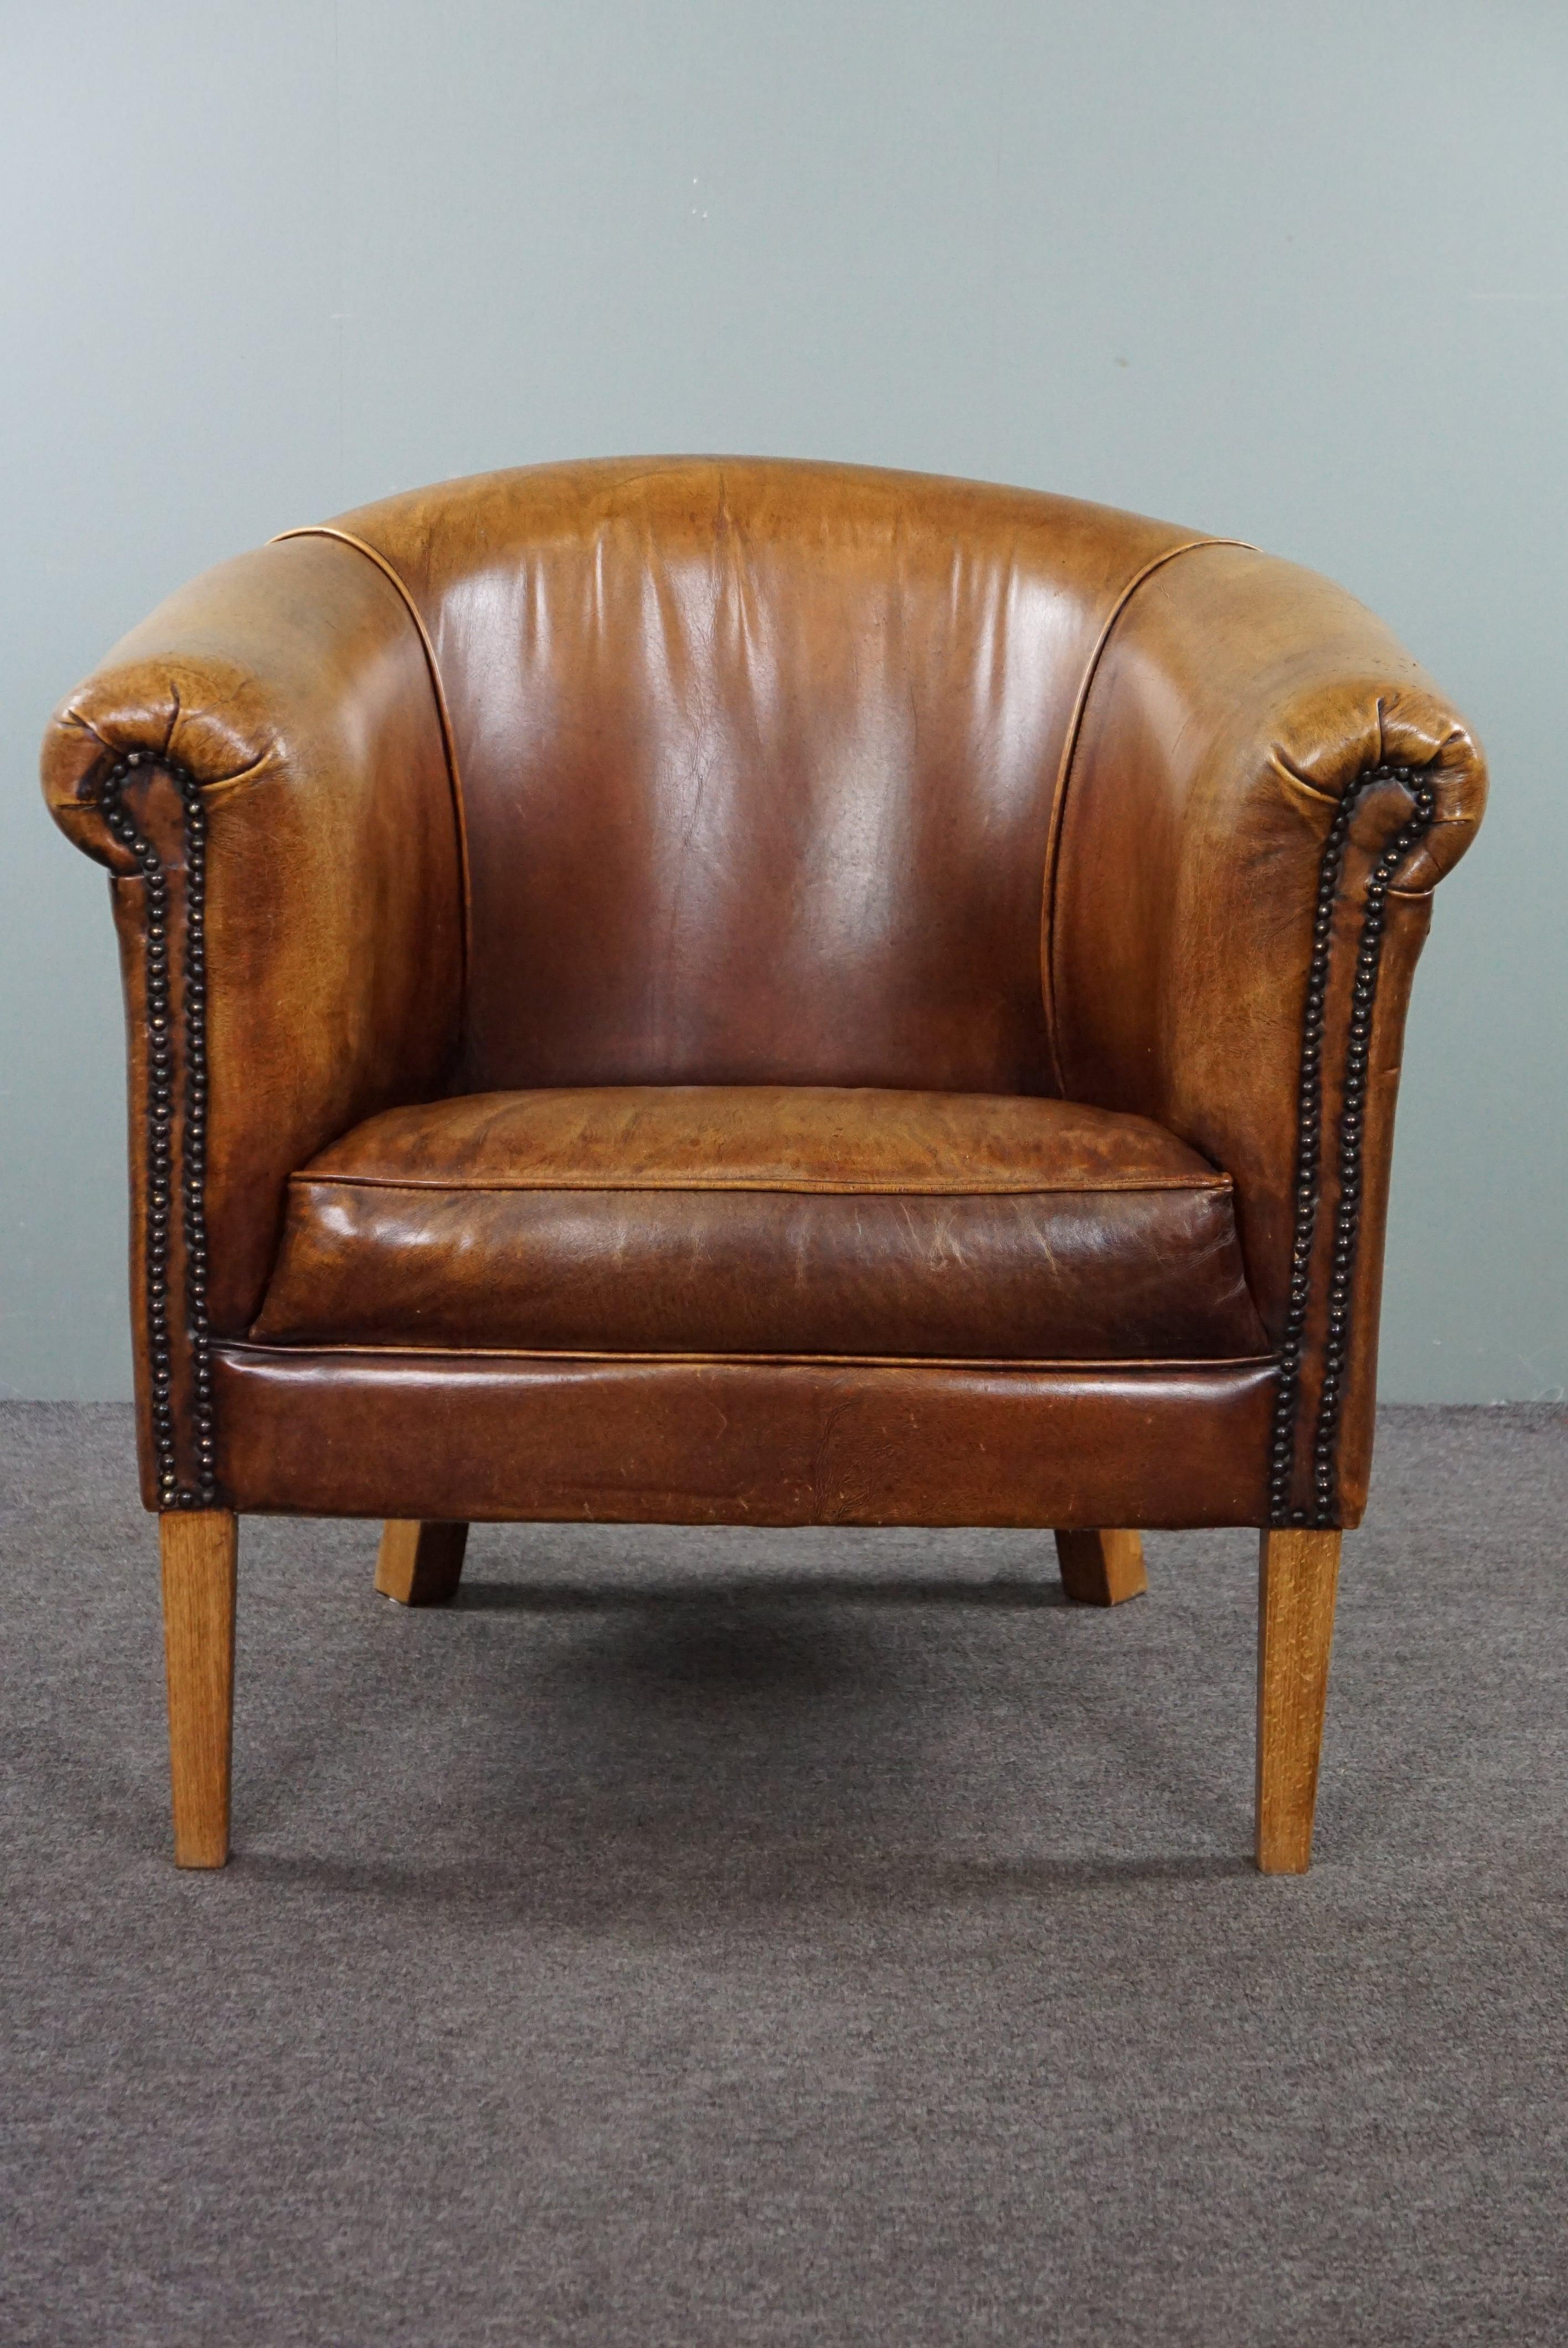 Offered is this beautiful sheep leather club chair.

You see an armchair with a beautiful patina, a comfortable seat and a beautiful division in the back. This is an item that will provide you with years of enjoyment. This cowhide club chair